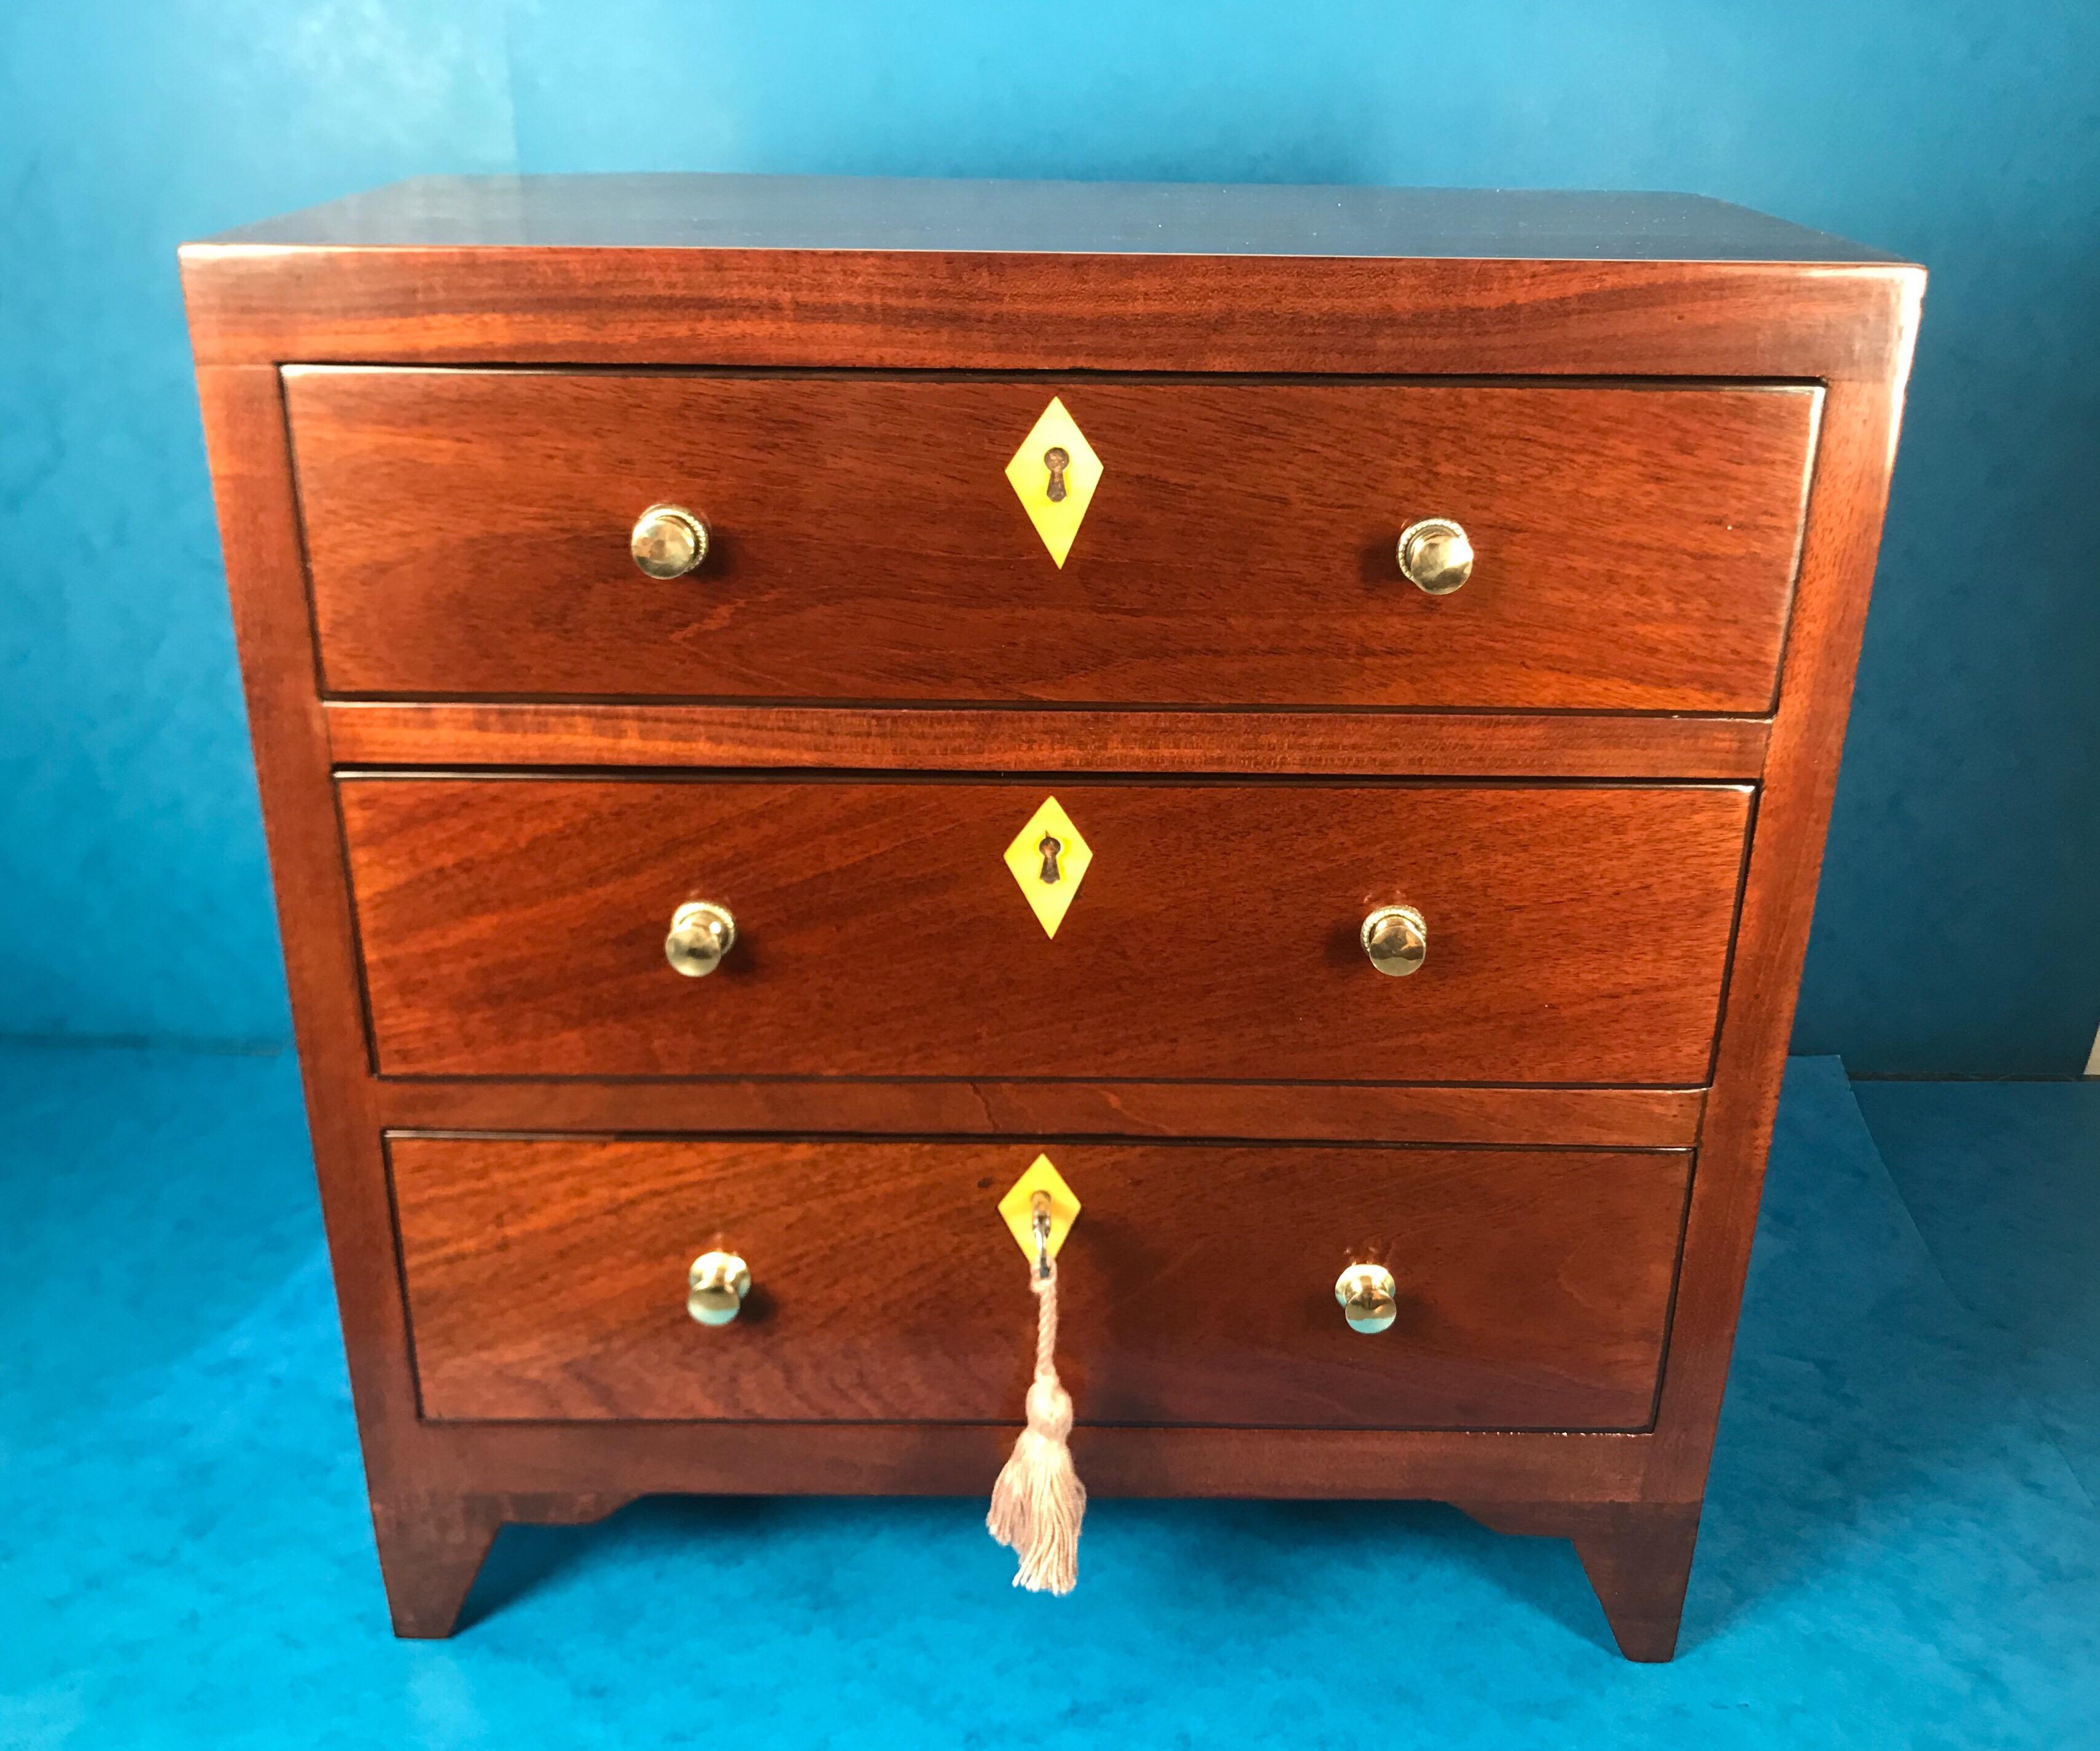 A Georgian 1820 mahogany miniature chest of drawers, it has a working lock and key that works on the borrow drawer.
It would make a perfect jewellery chest or it would be perfect for watches. Great for a man or a lady.
It measures 36 by 17 and